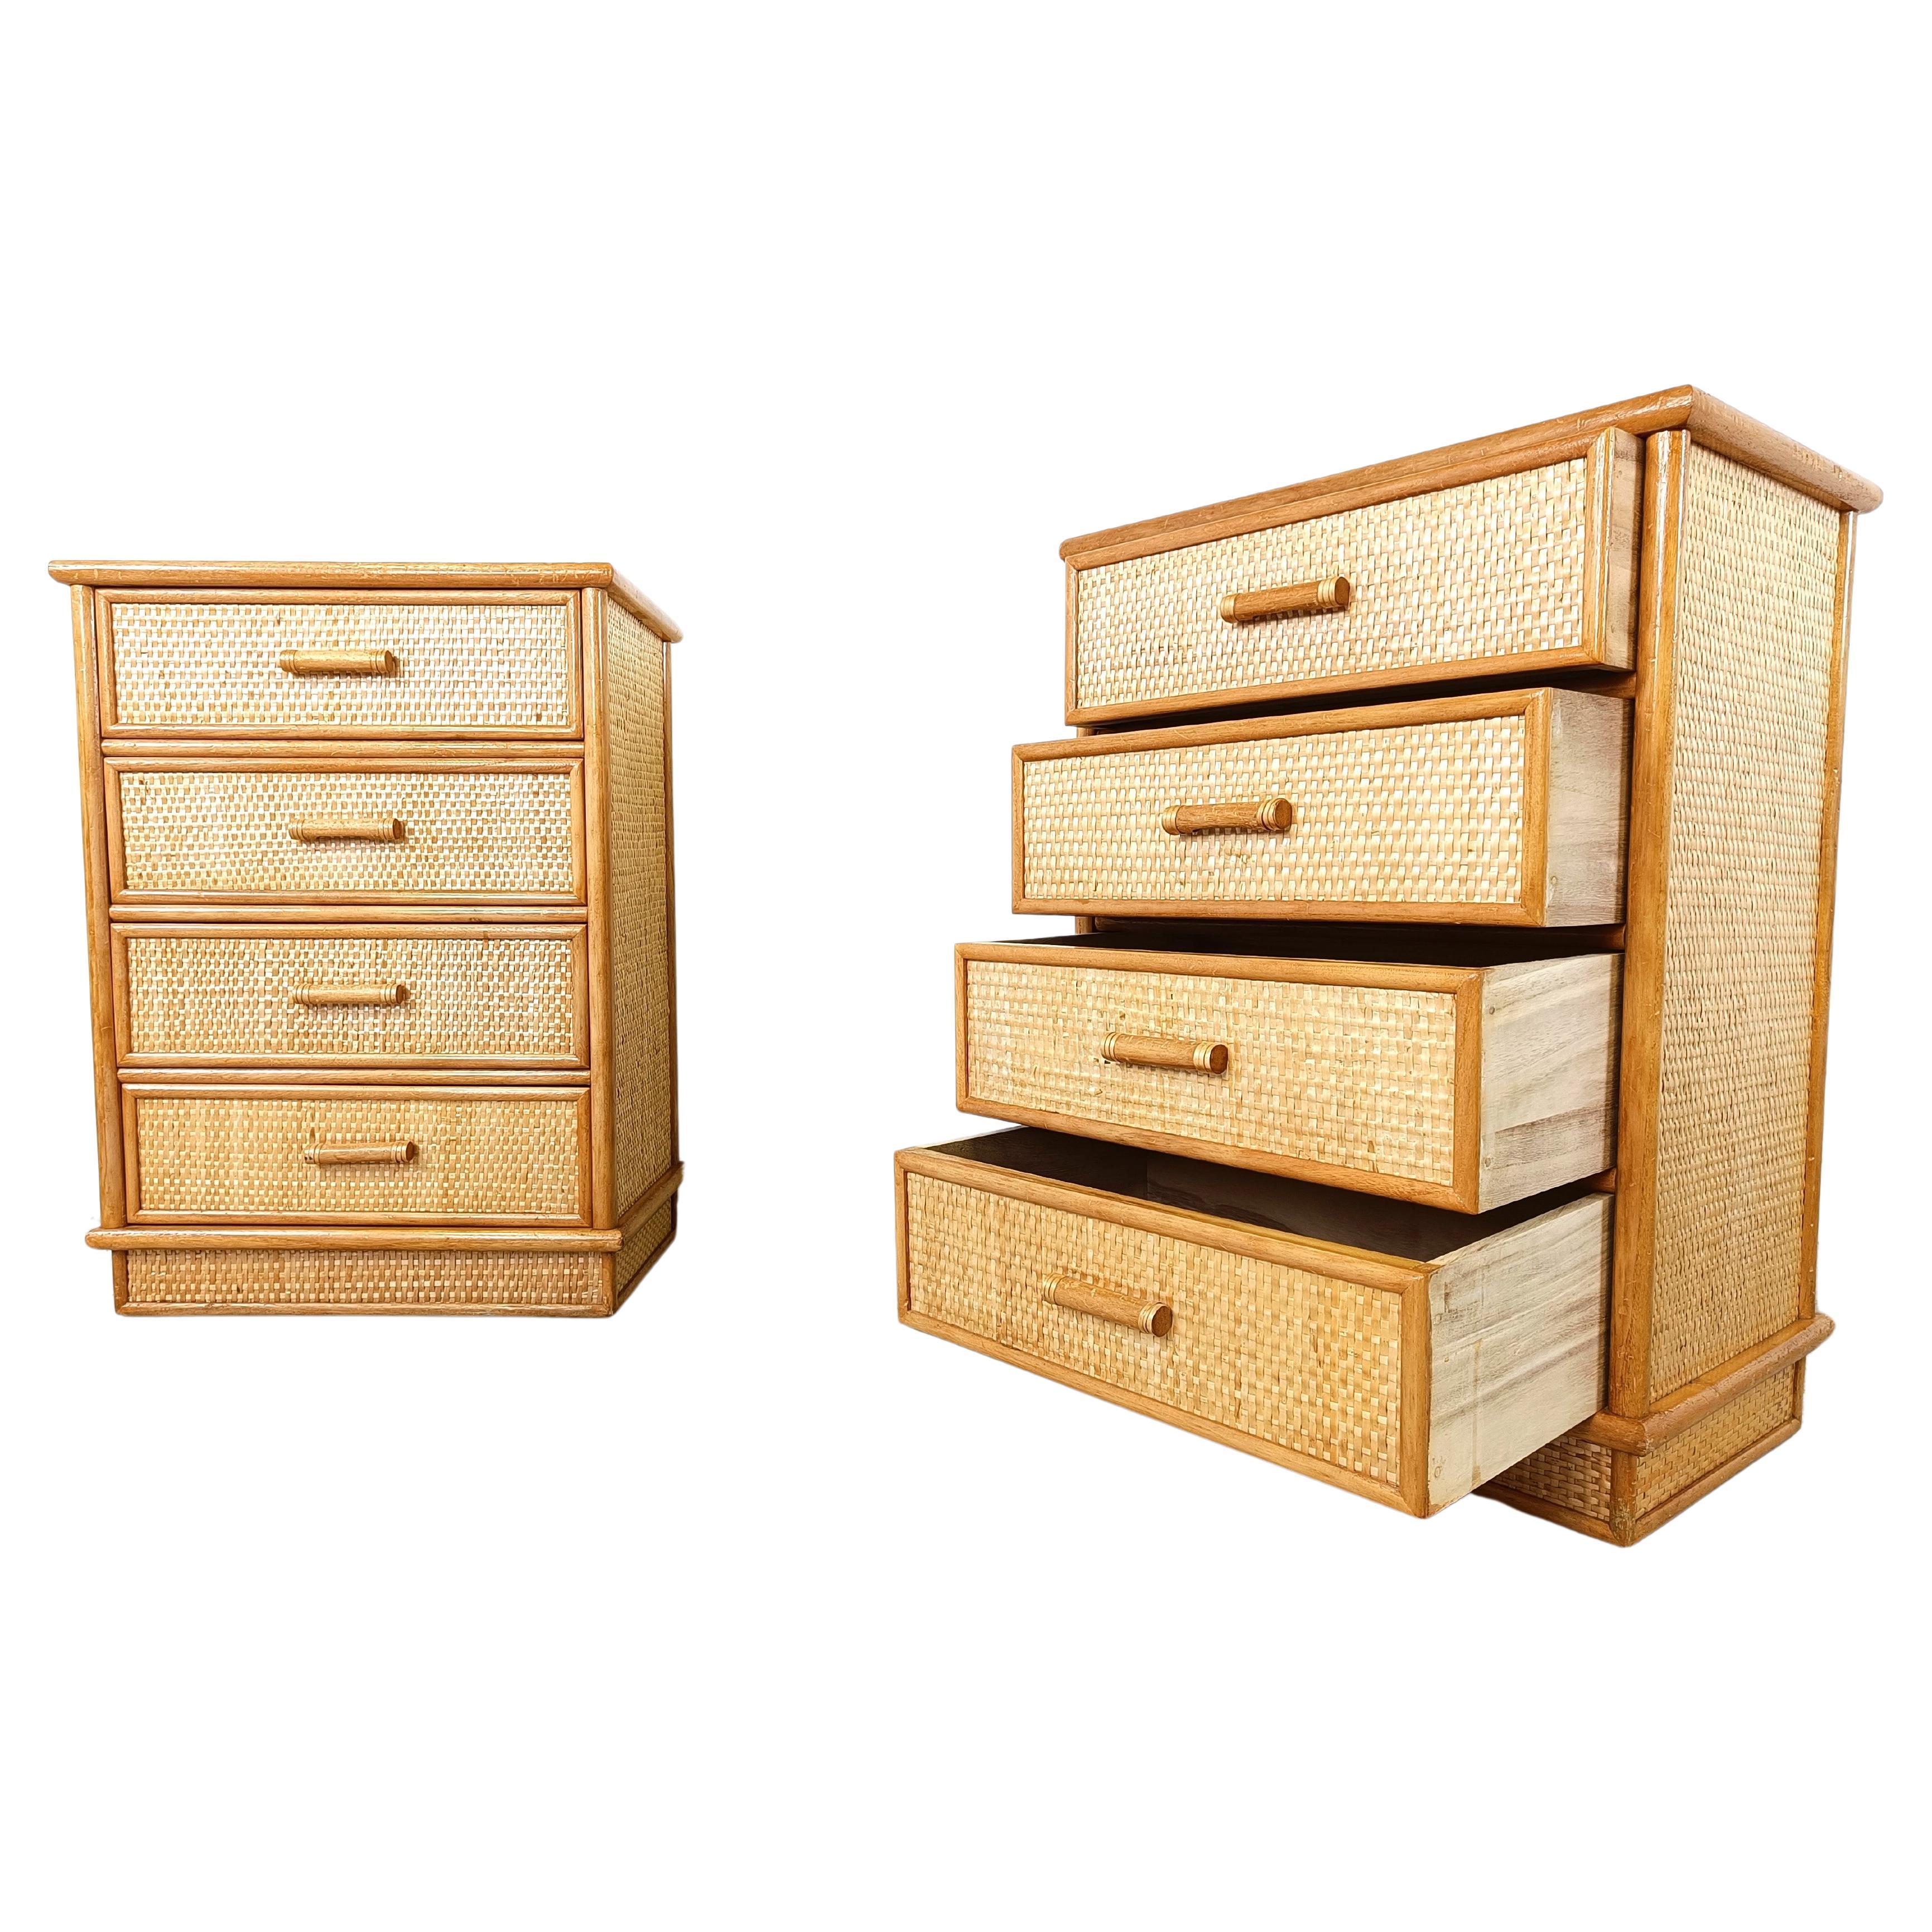 Pair of vintage rattan chest of drawers, 1970s